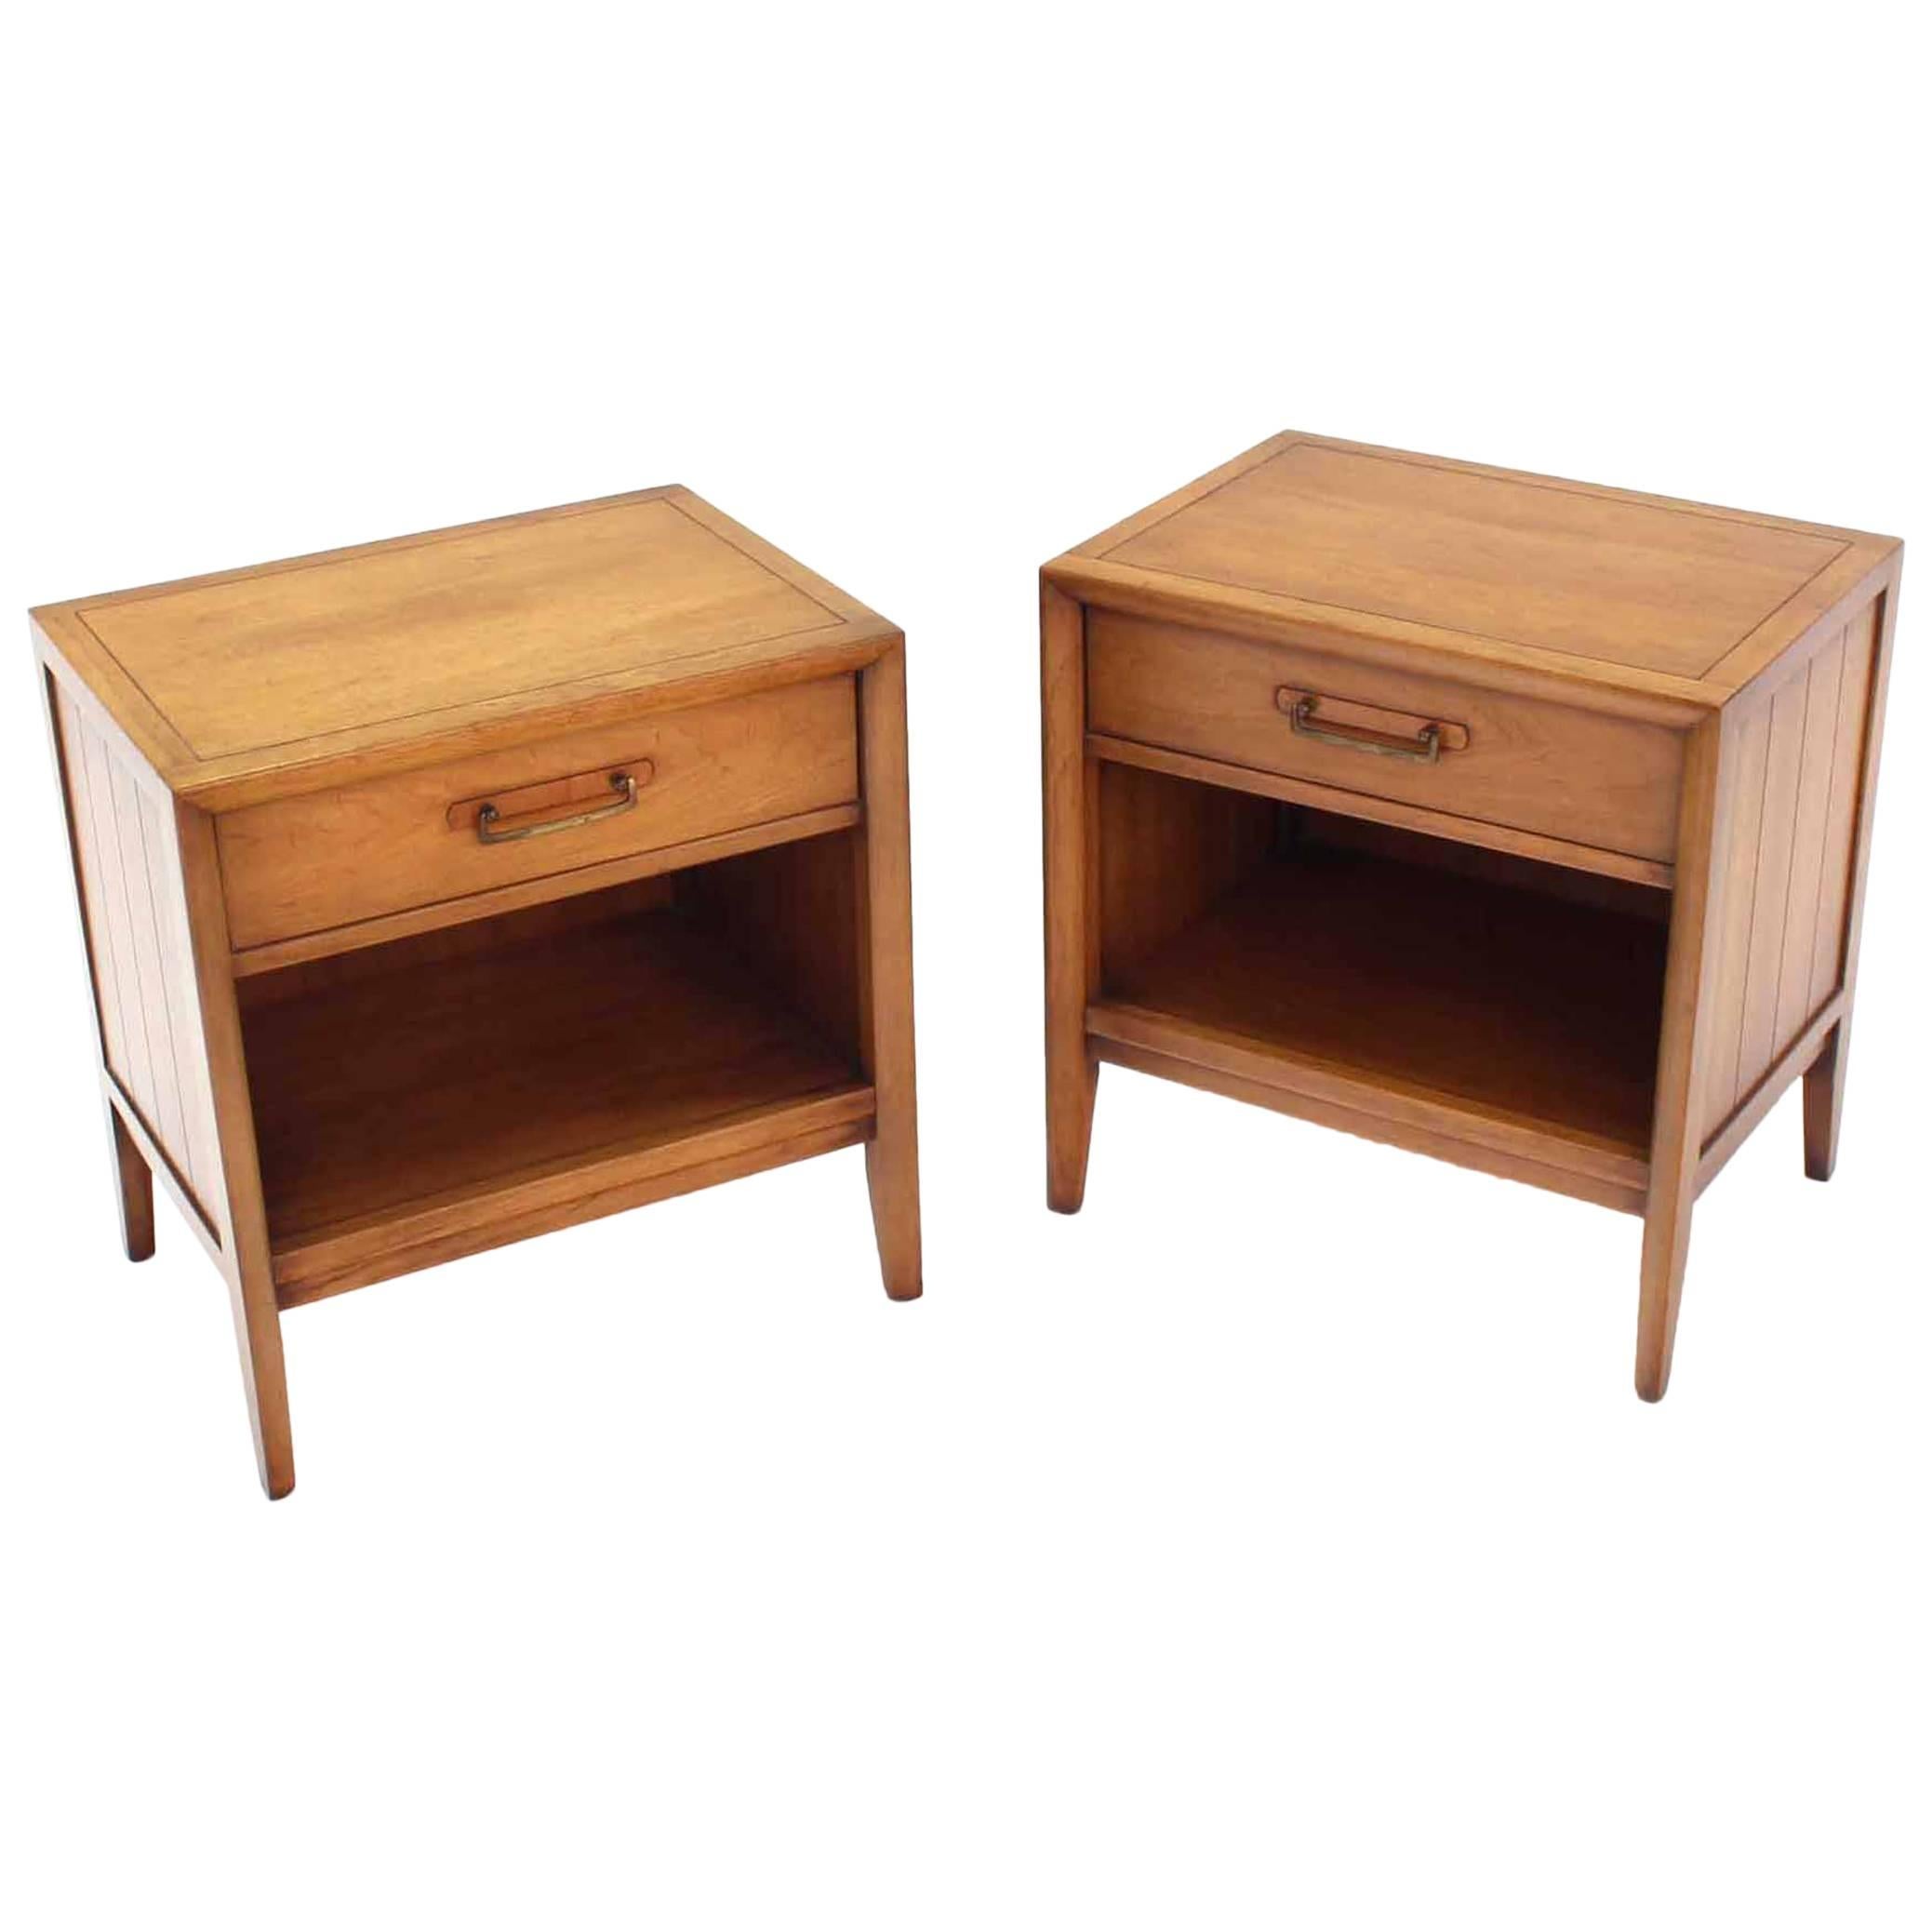 Pair of Mid-Century One Drawer Nightstands by Drexel